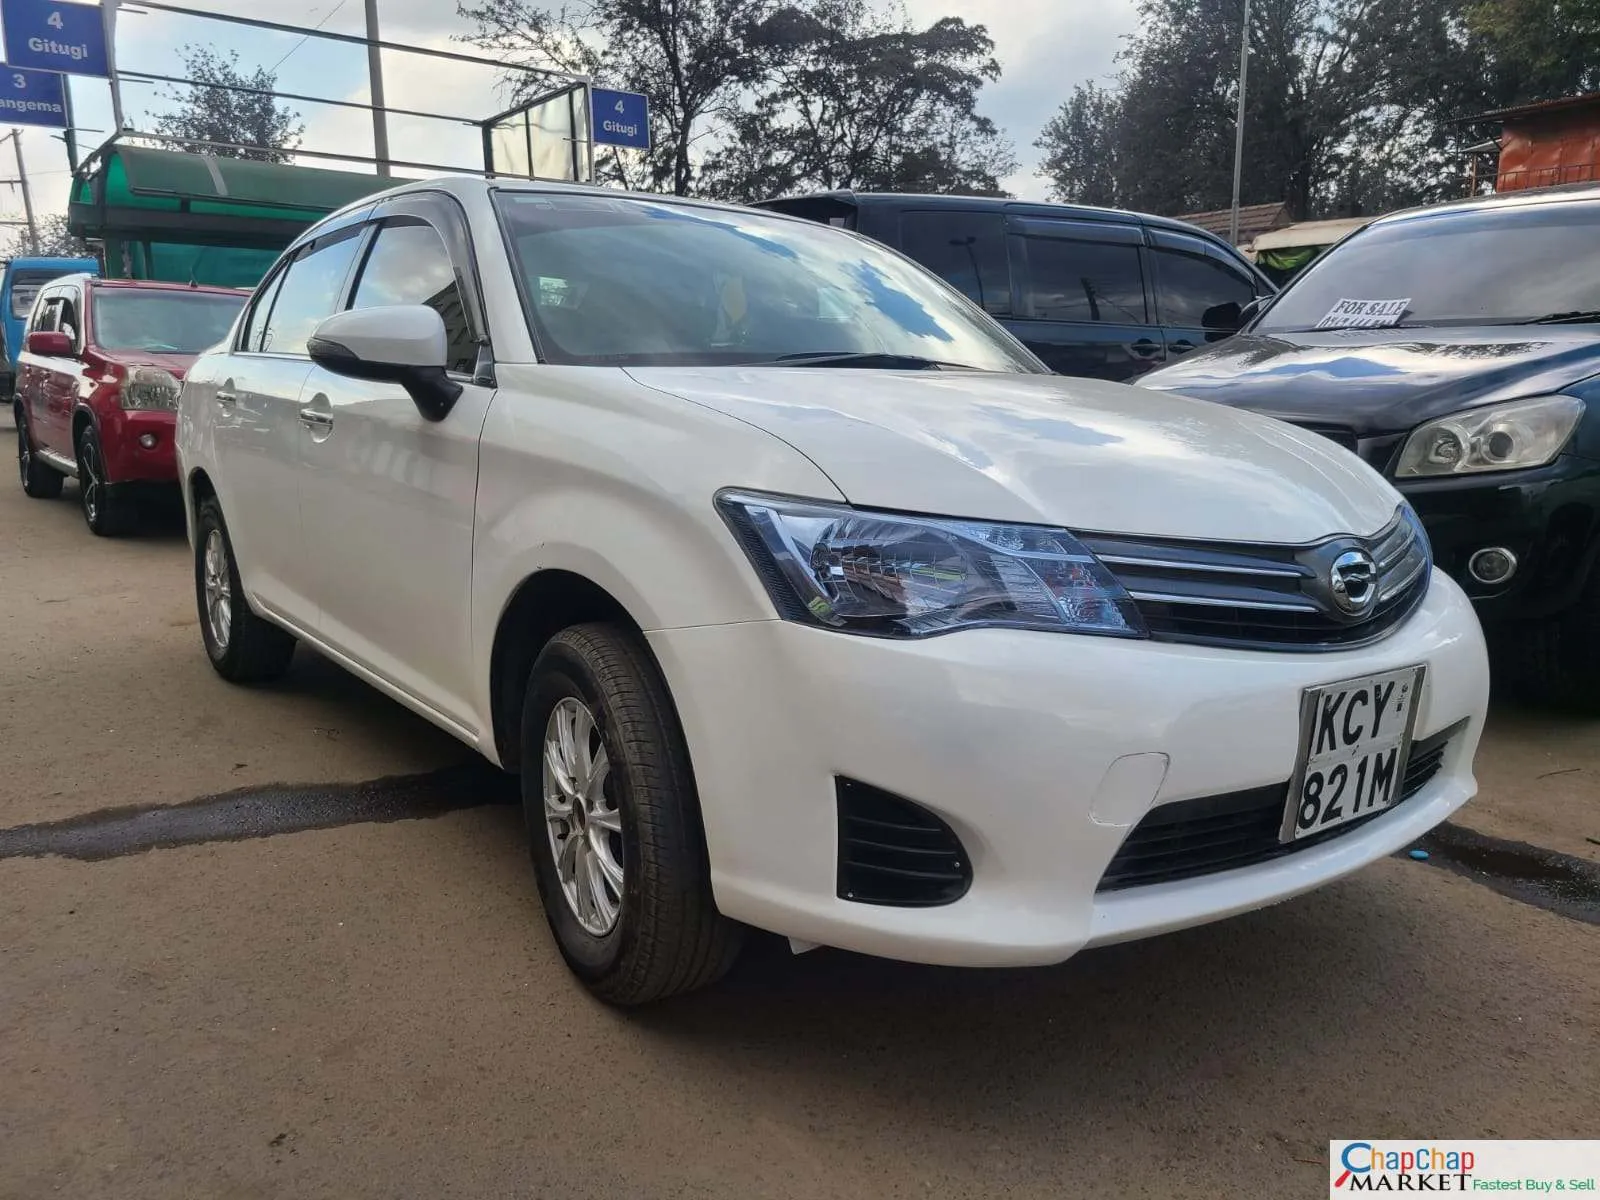 Toyota AXIO CHEAPEST You pay 30% Deposit Trade in Ok axio For Sale in Kenya hire purchase installments axio exclusive